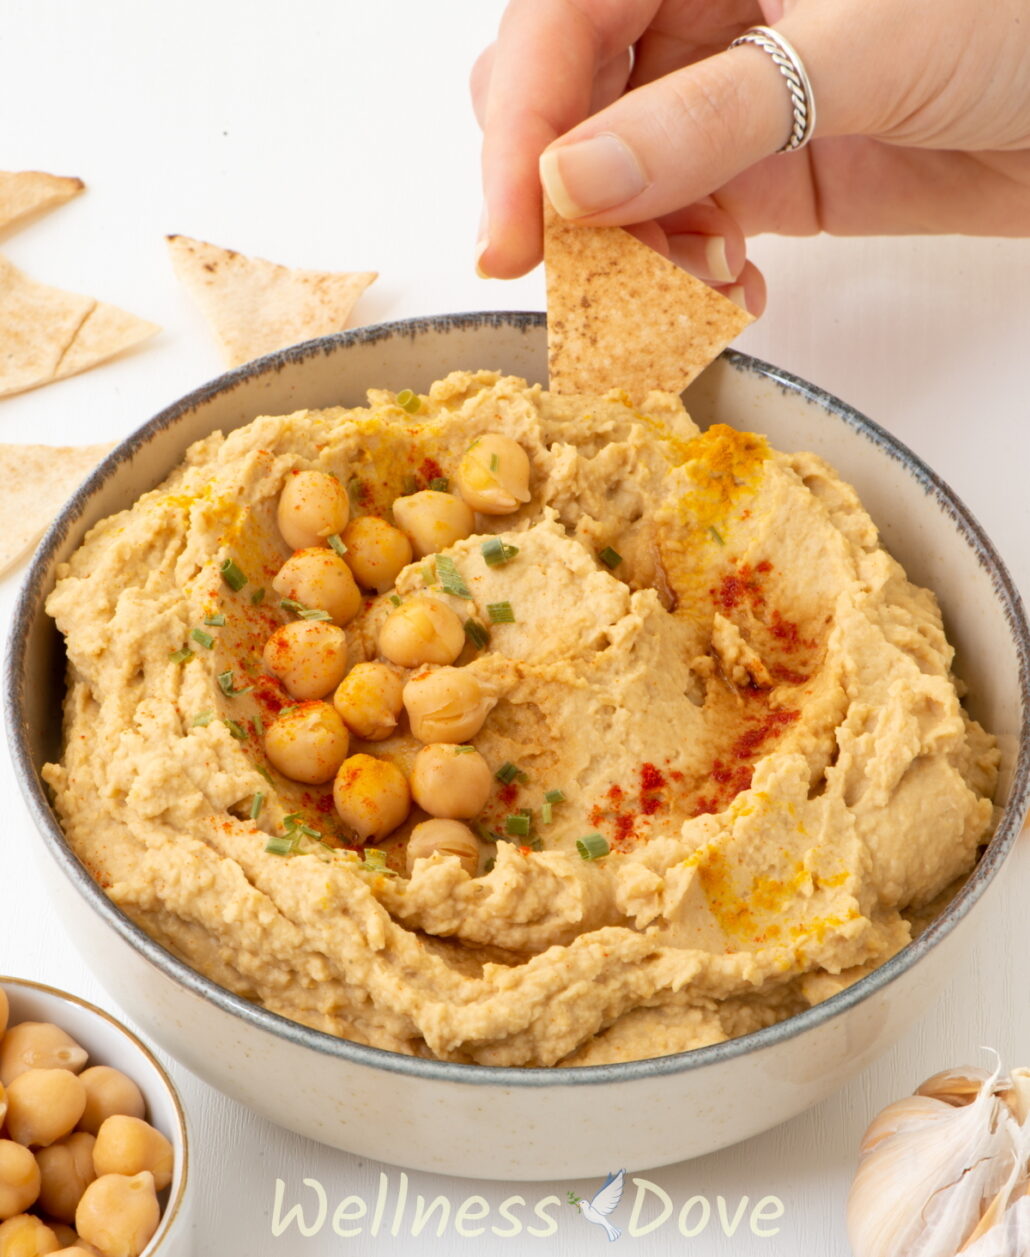 3/4 view of the 5 ingredient oil-free vegan hummus with a hand taking a bite with a cracker